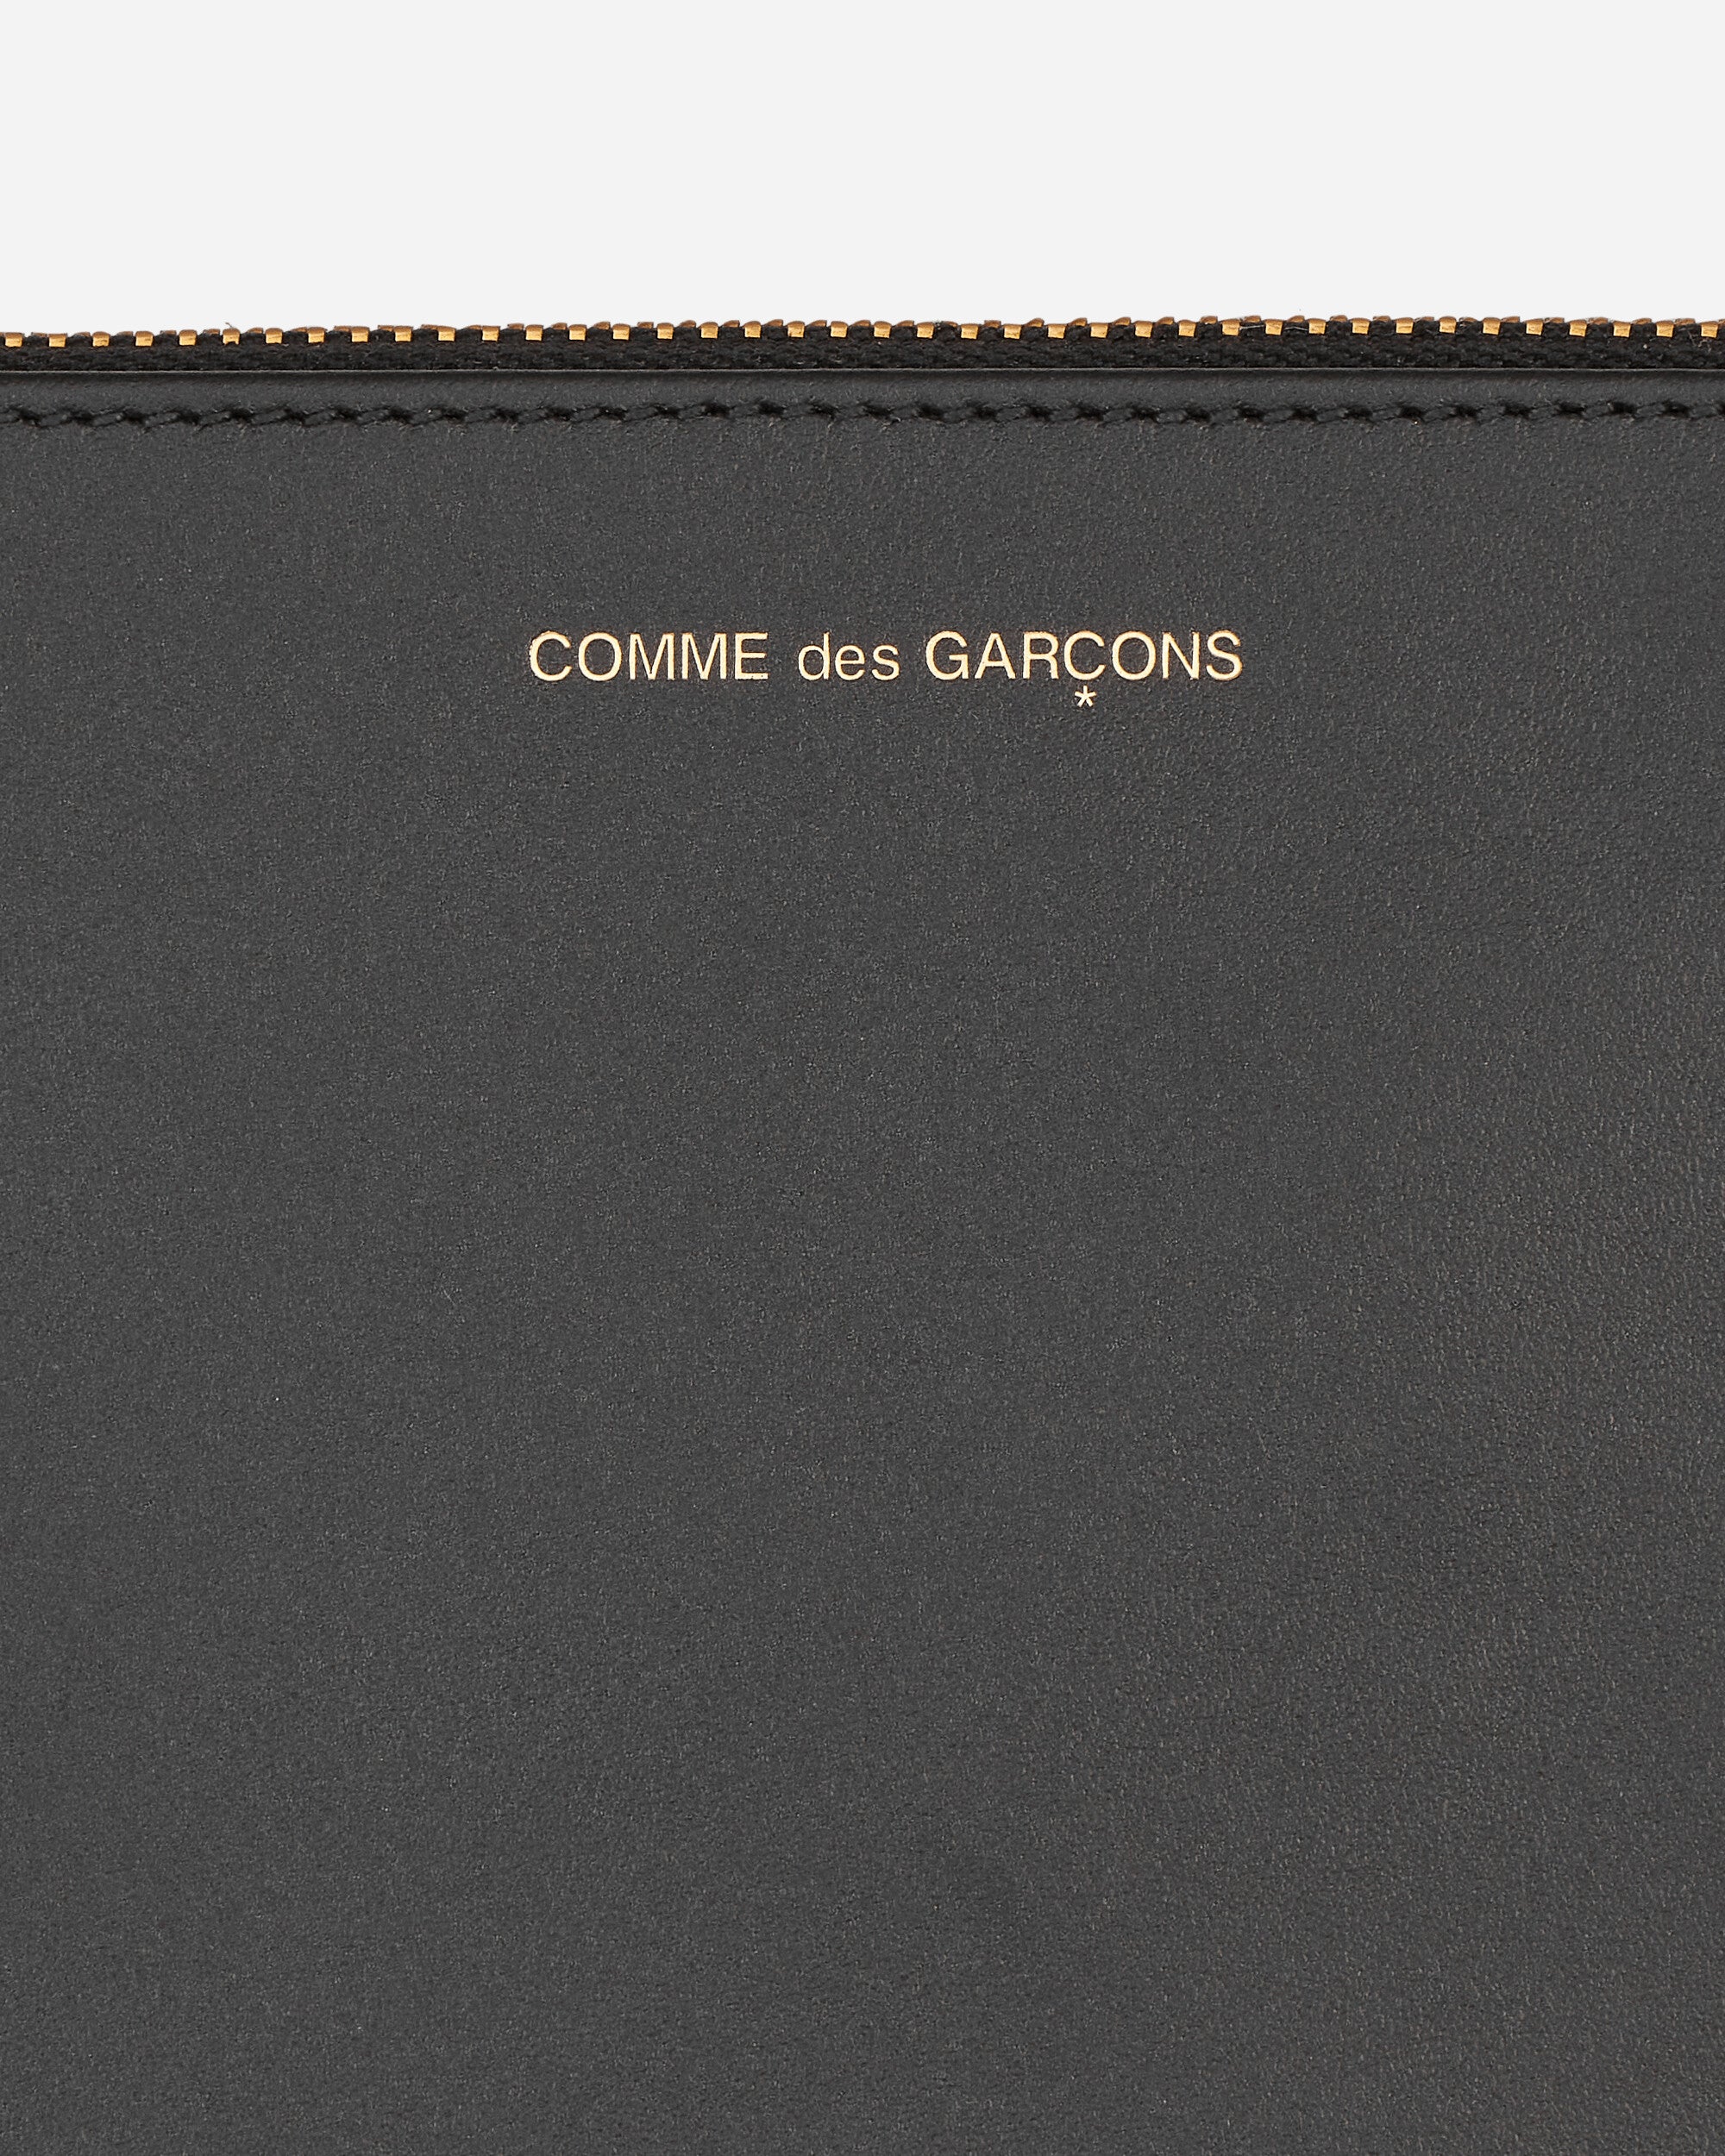 Comme Des Garçons Wallet Wallet/Classic Print Check Print Wallets and Cardholders Wallets SA5100CP 1